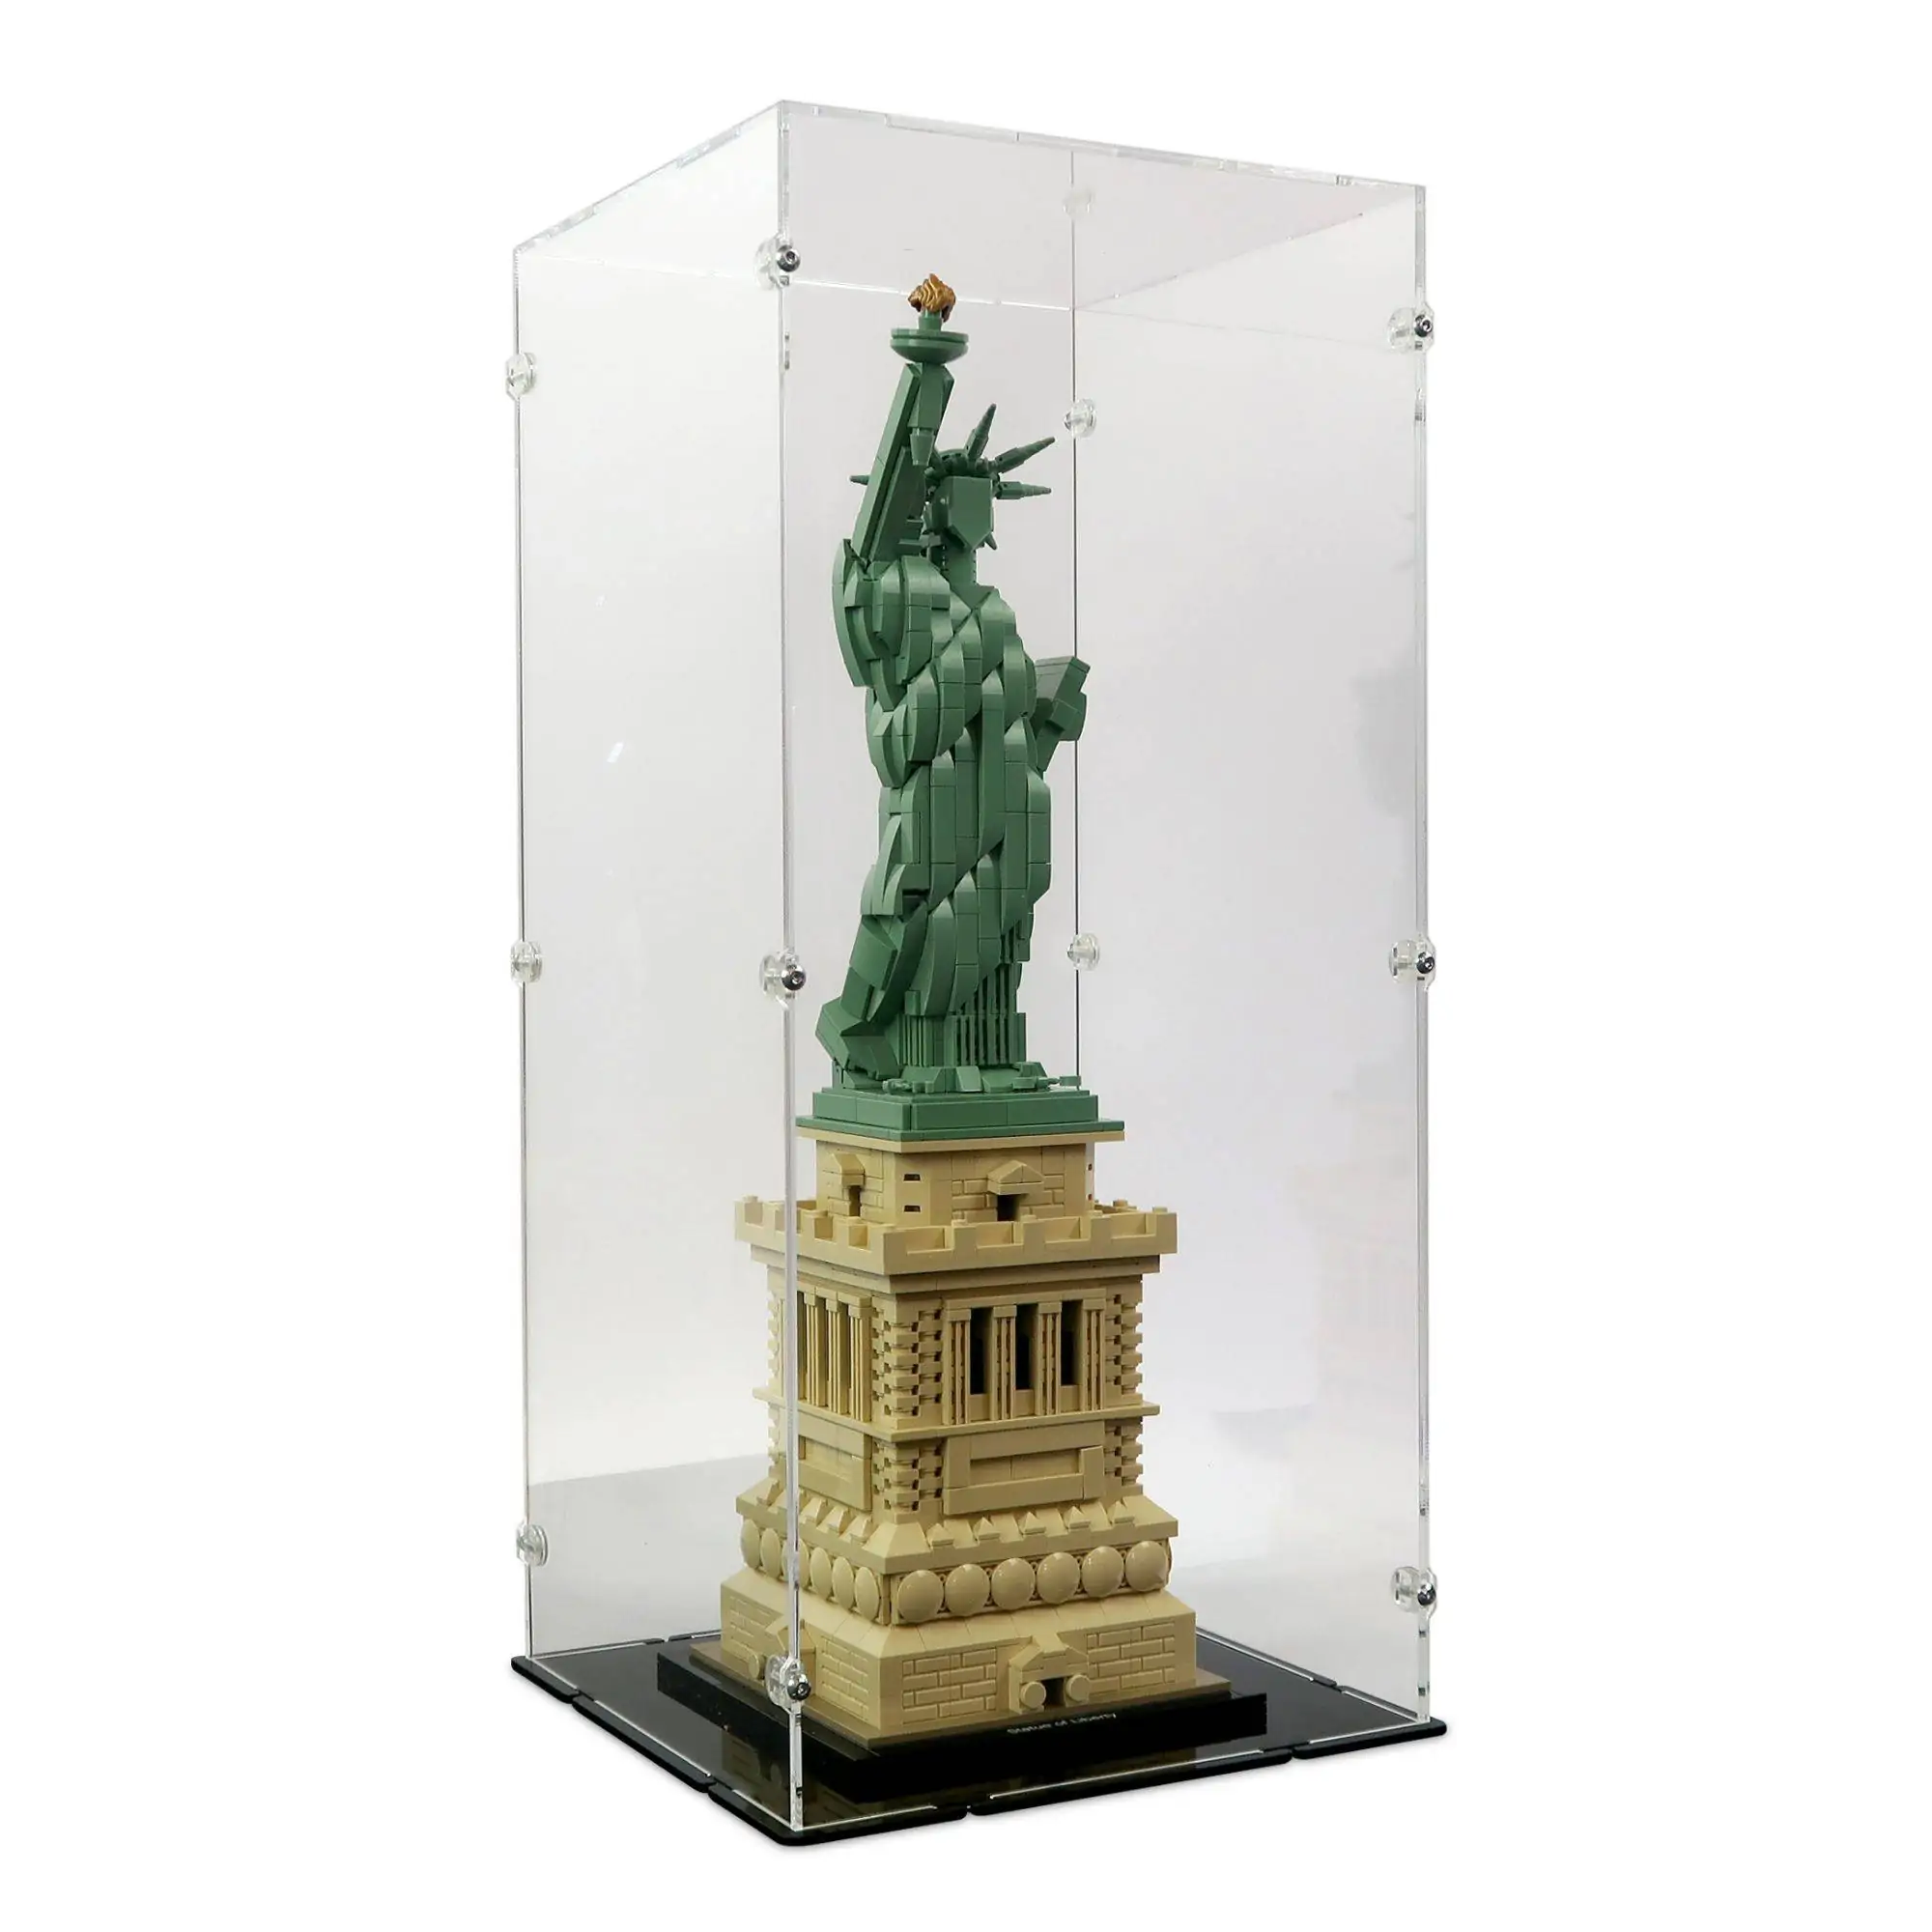 LEGO 21042 Statue of Liberty review